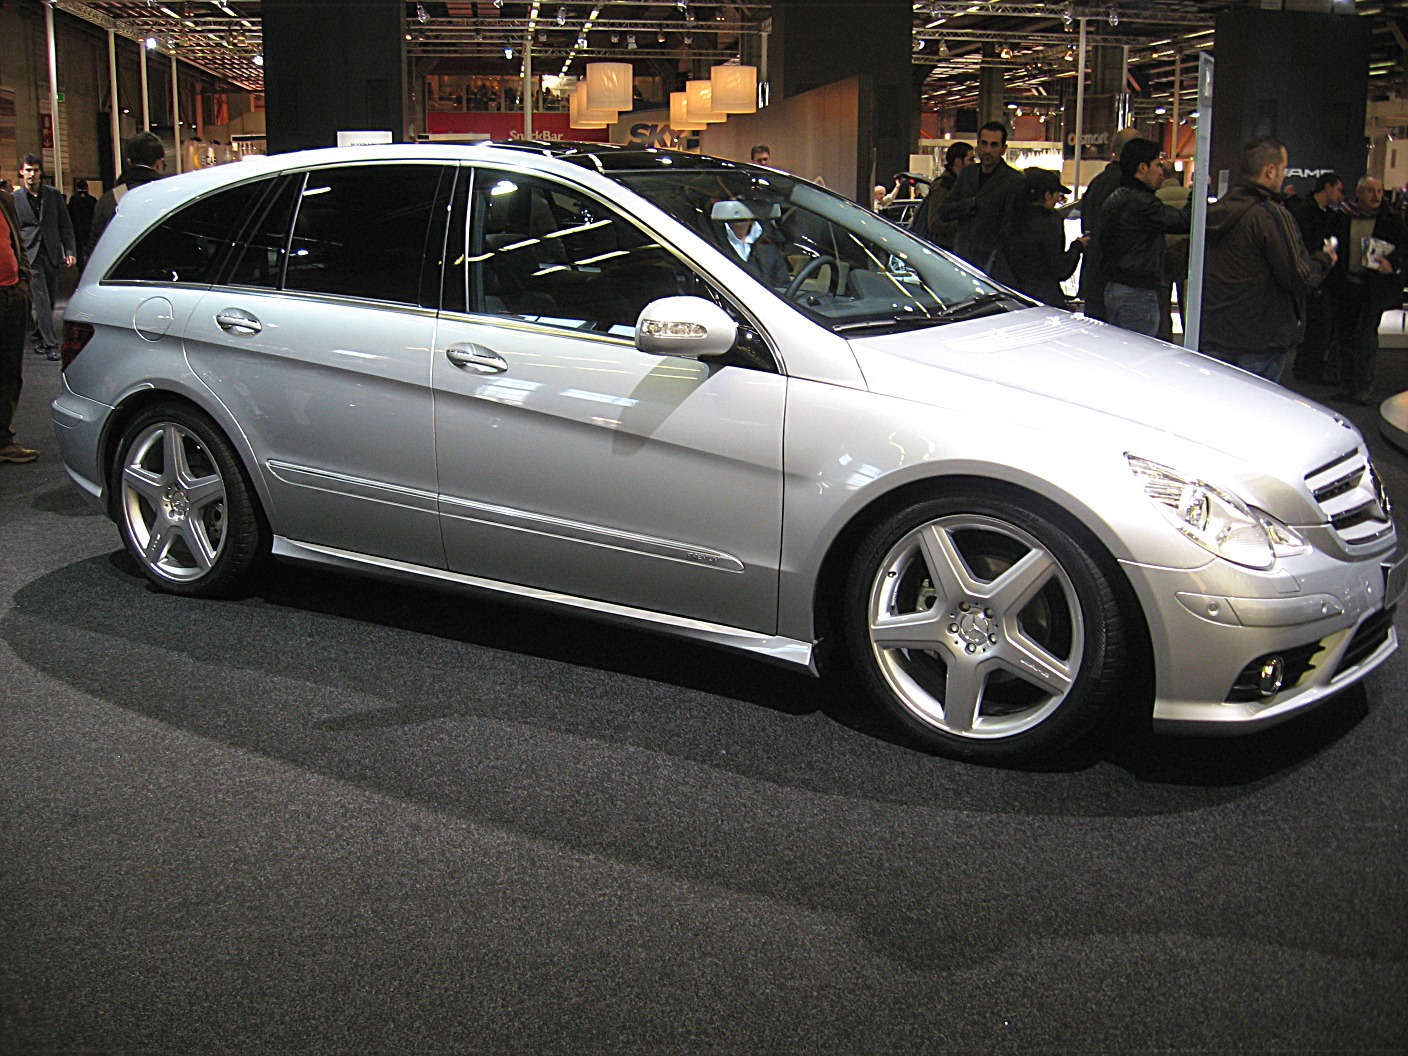 File:Mercedes-Benz R-Class-AMG Side-view.JPG - Wikimedia Commons